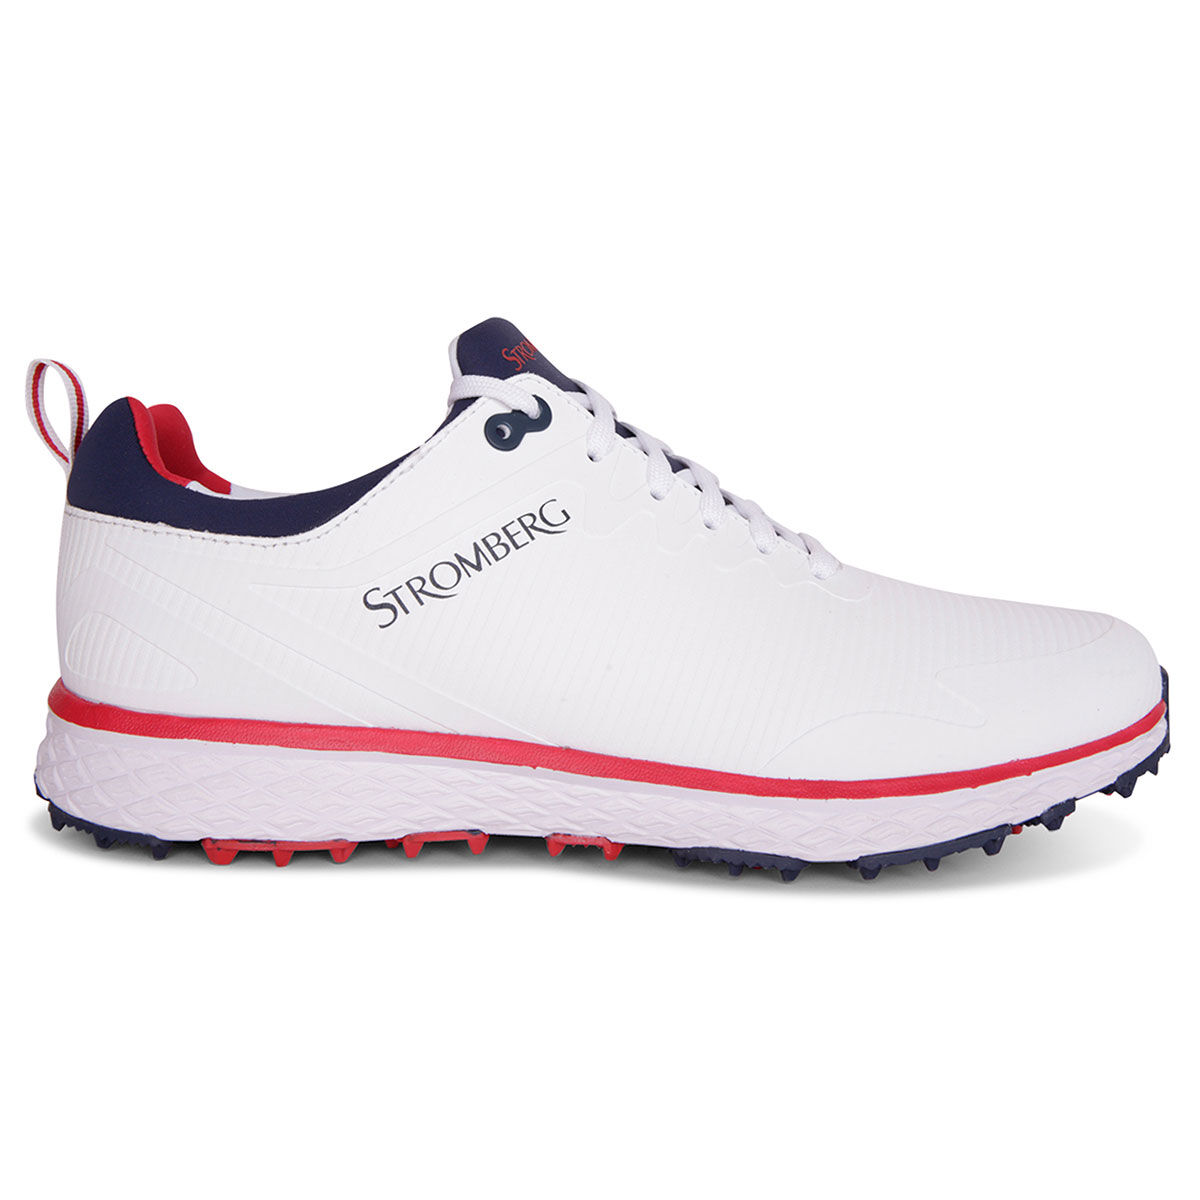 Stromberg Mens White, Red and Navy Blue Waterproof Tempo Spikeless Golf Shoes, Size: 9  | American Golf von Stromberg